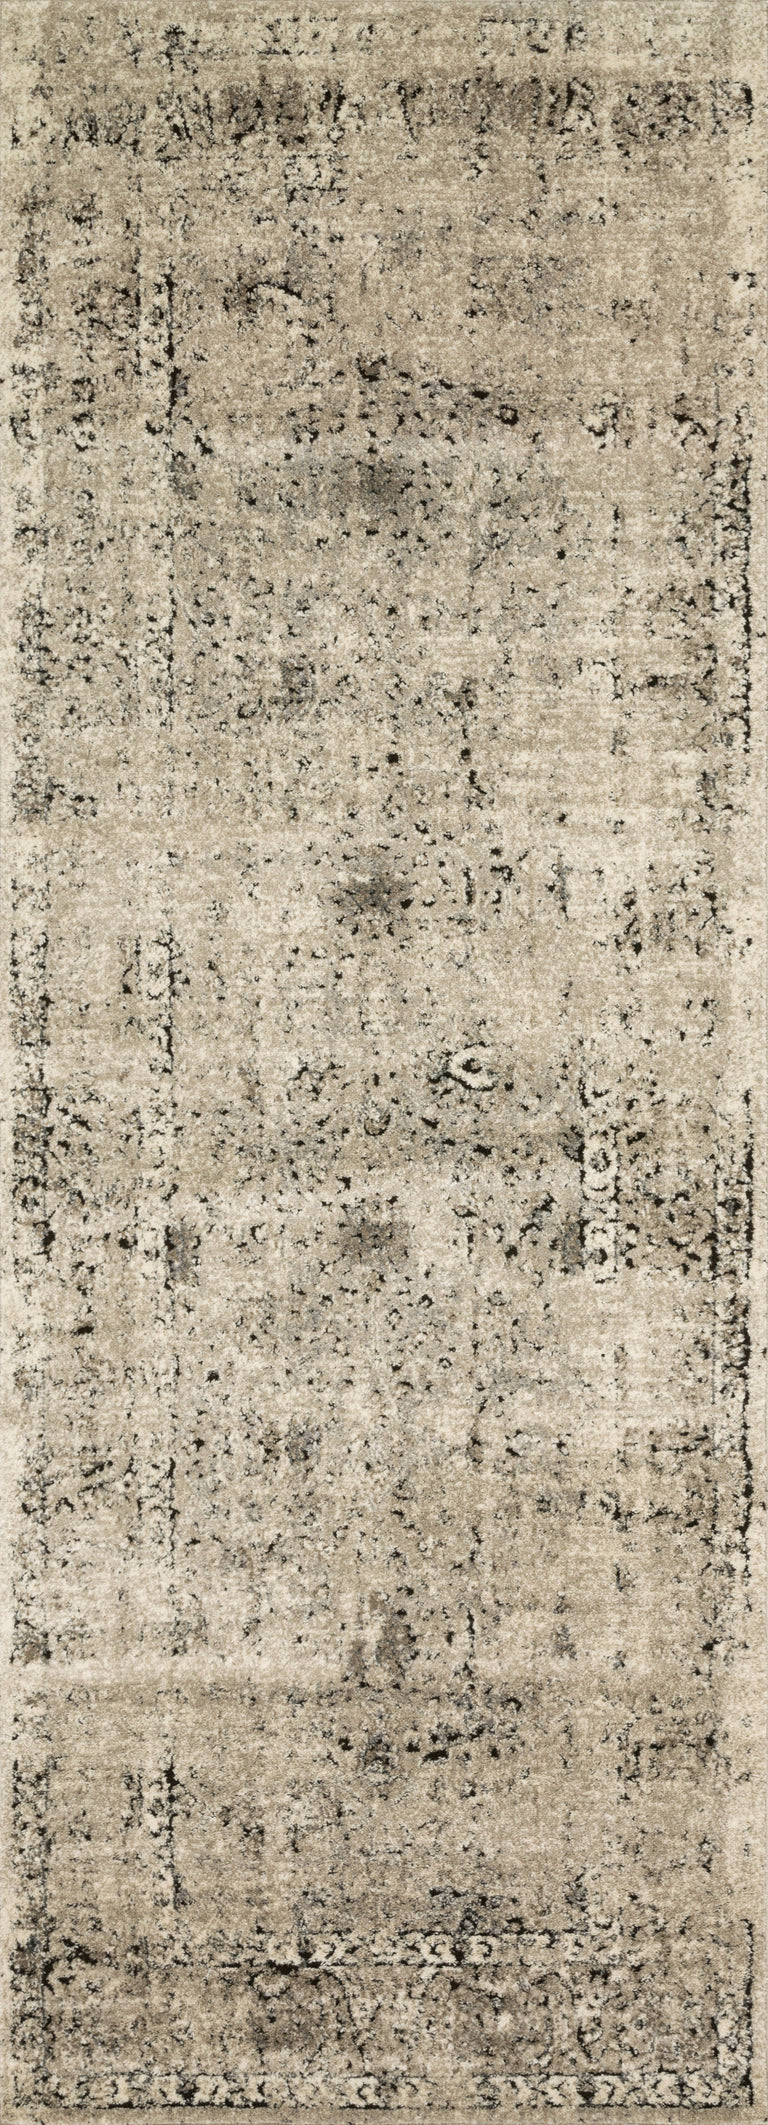 Loloi Rugs Millennium Collection Rug in Stone, Charcoal - 9'6" x 13'